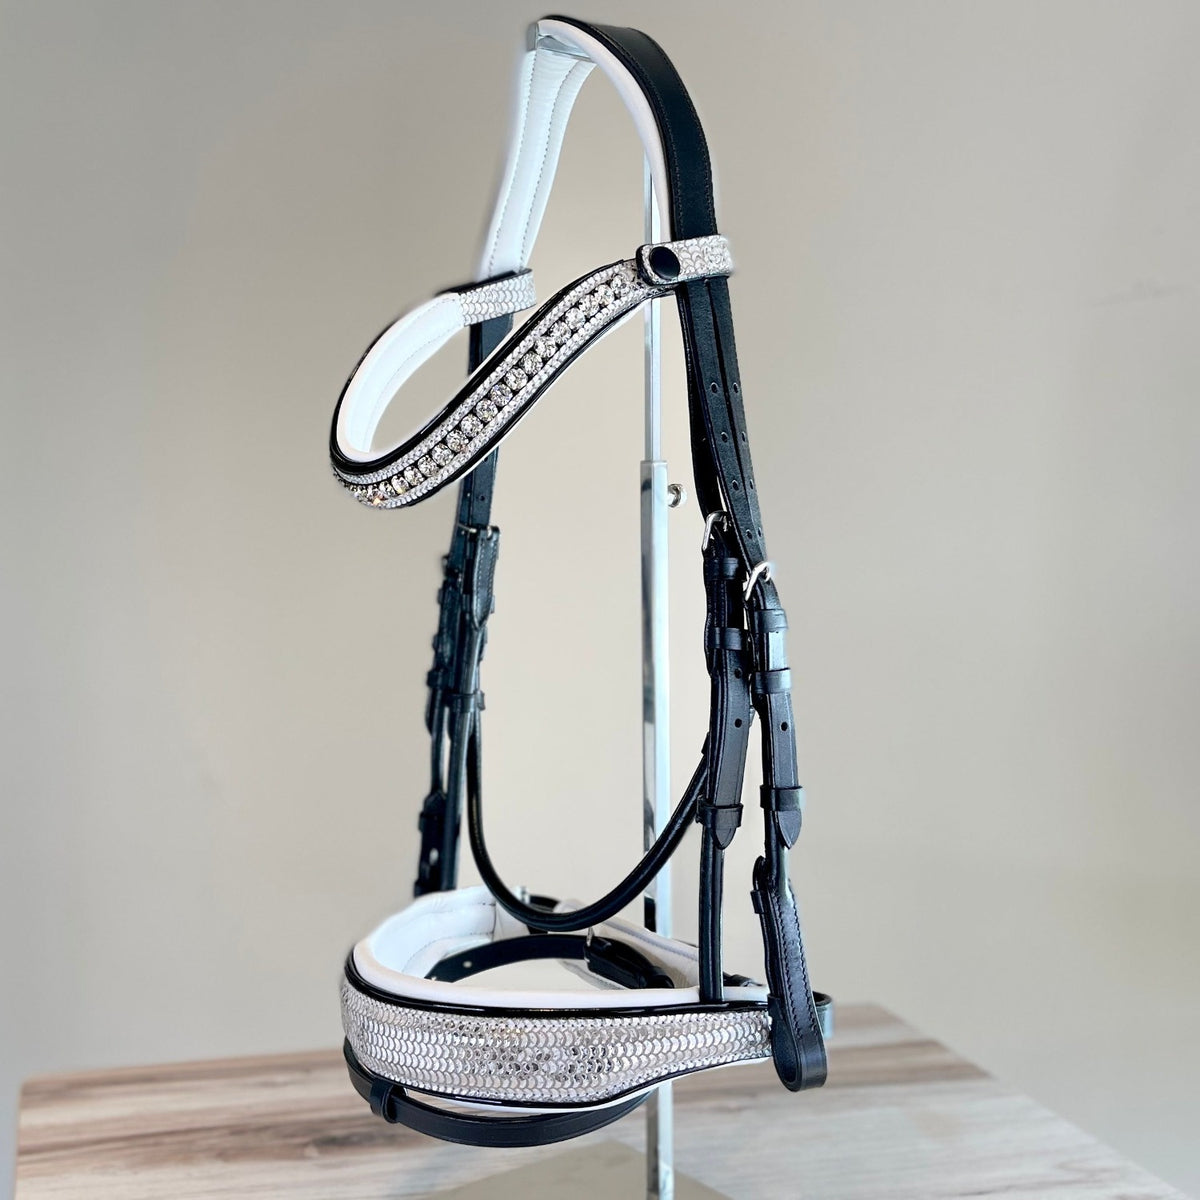 The Deco Anatomical Snaffle Bridle